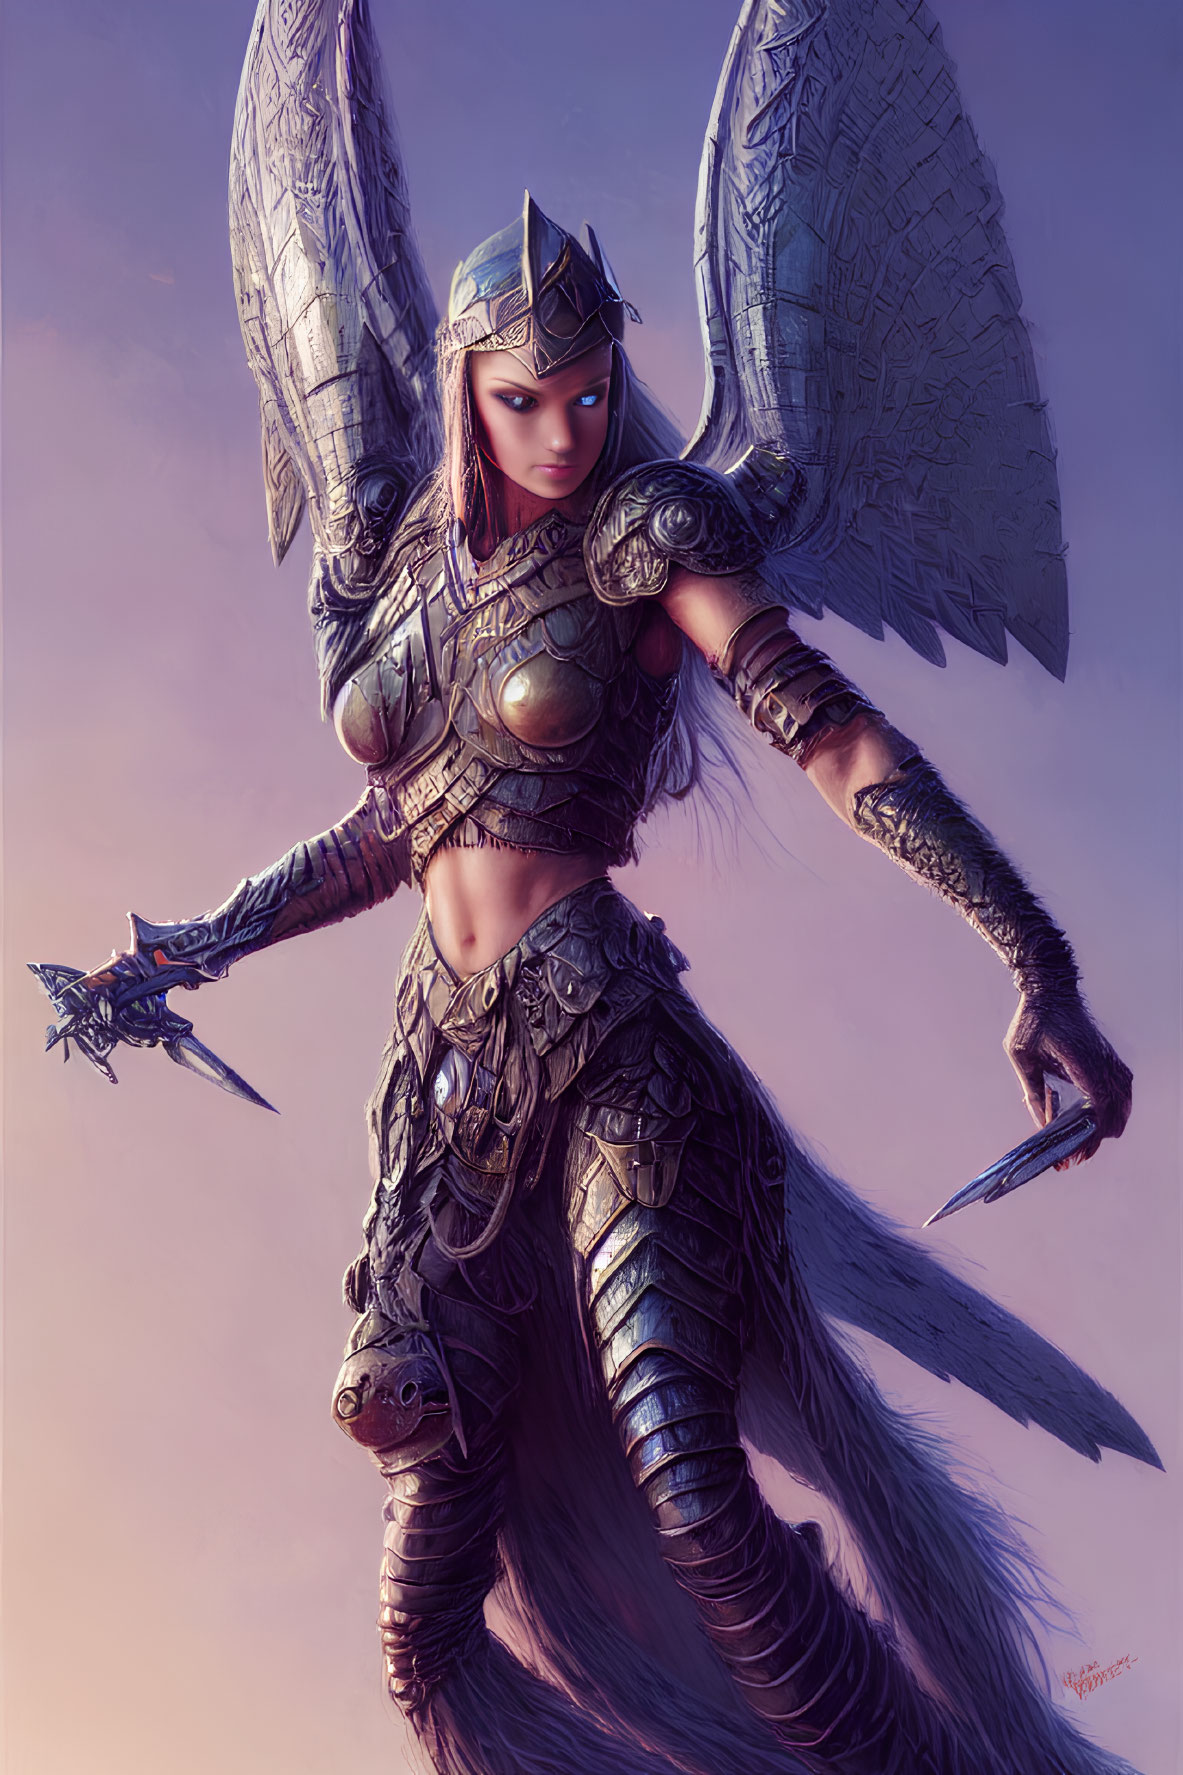 Warrior woman in ornate armor with wings and spear ready for battle